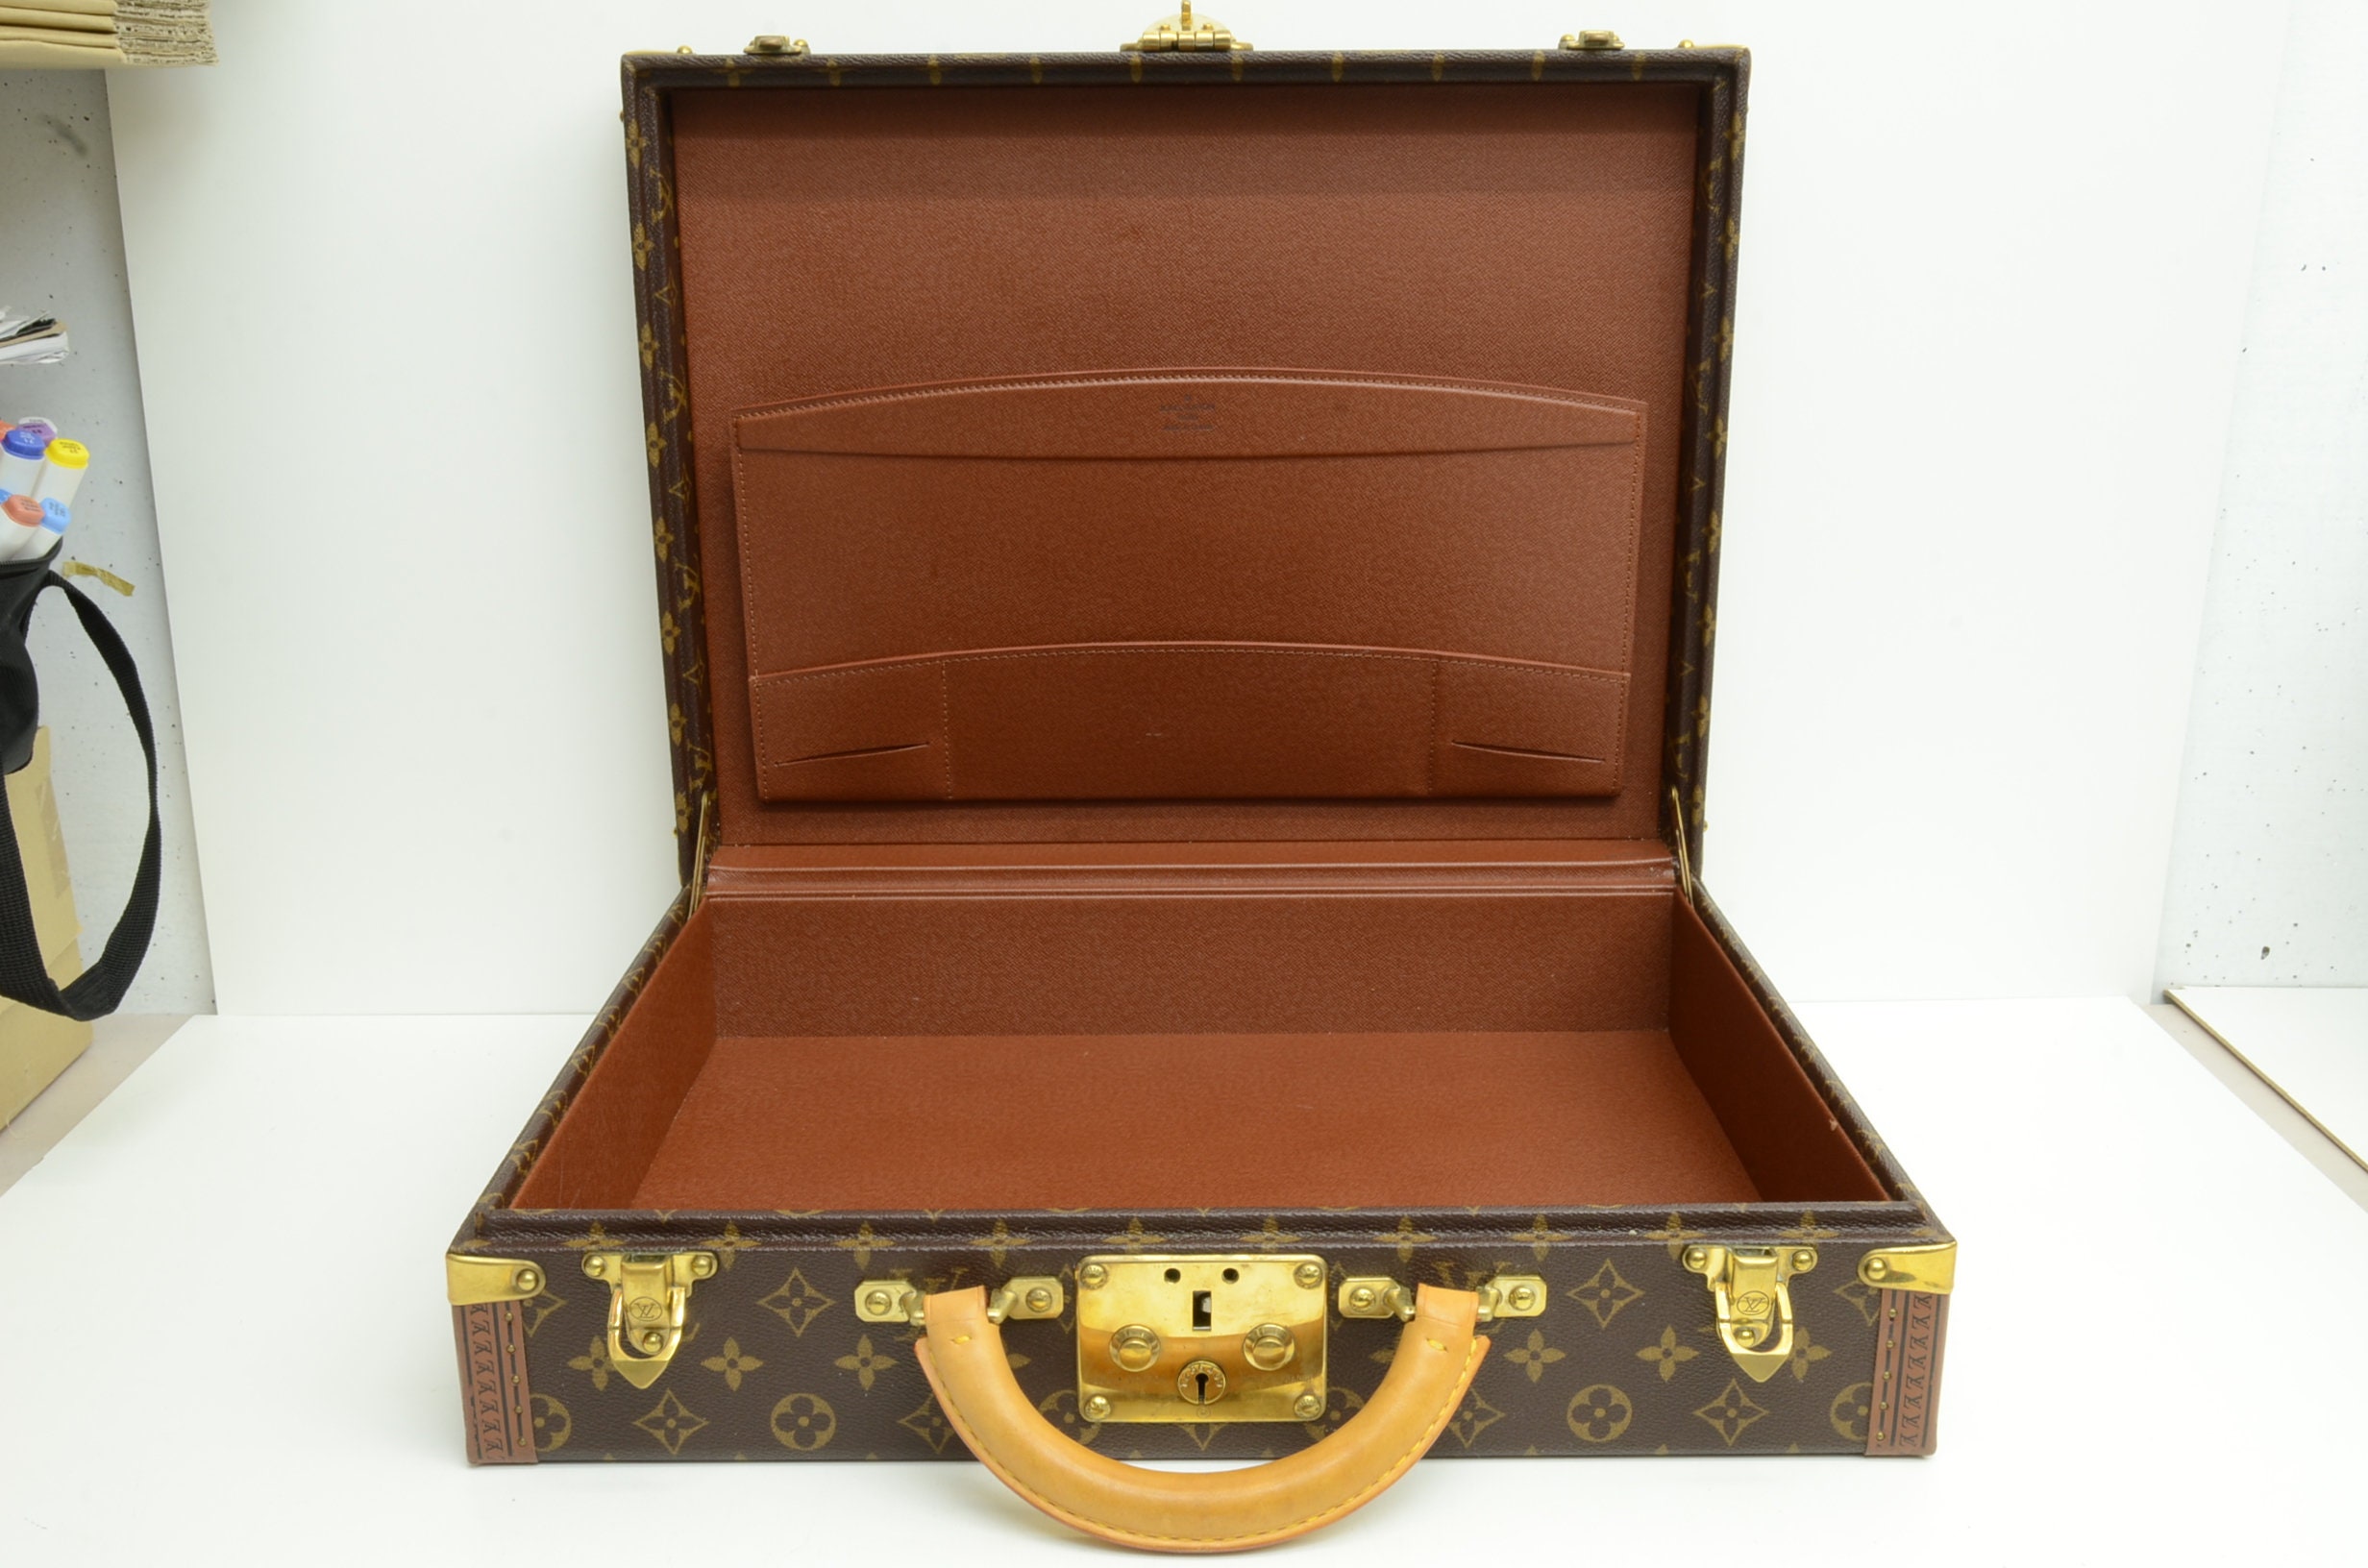 Authentic Louis Vuitton President Briefcase 1st Edition -  Norway